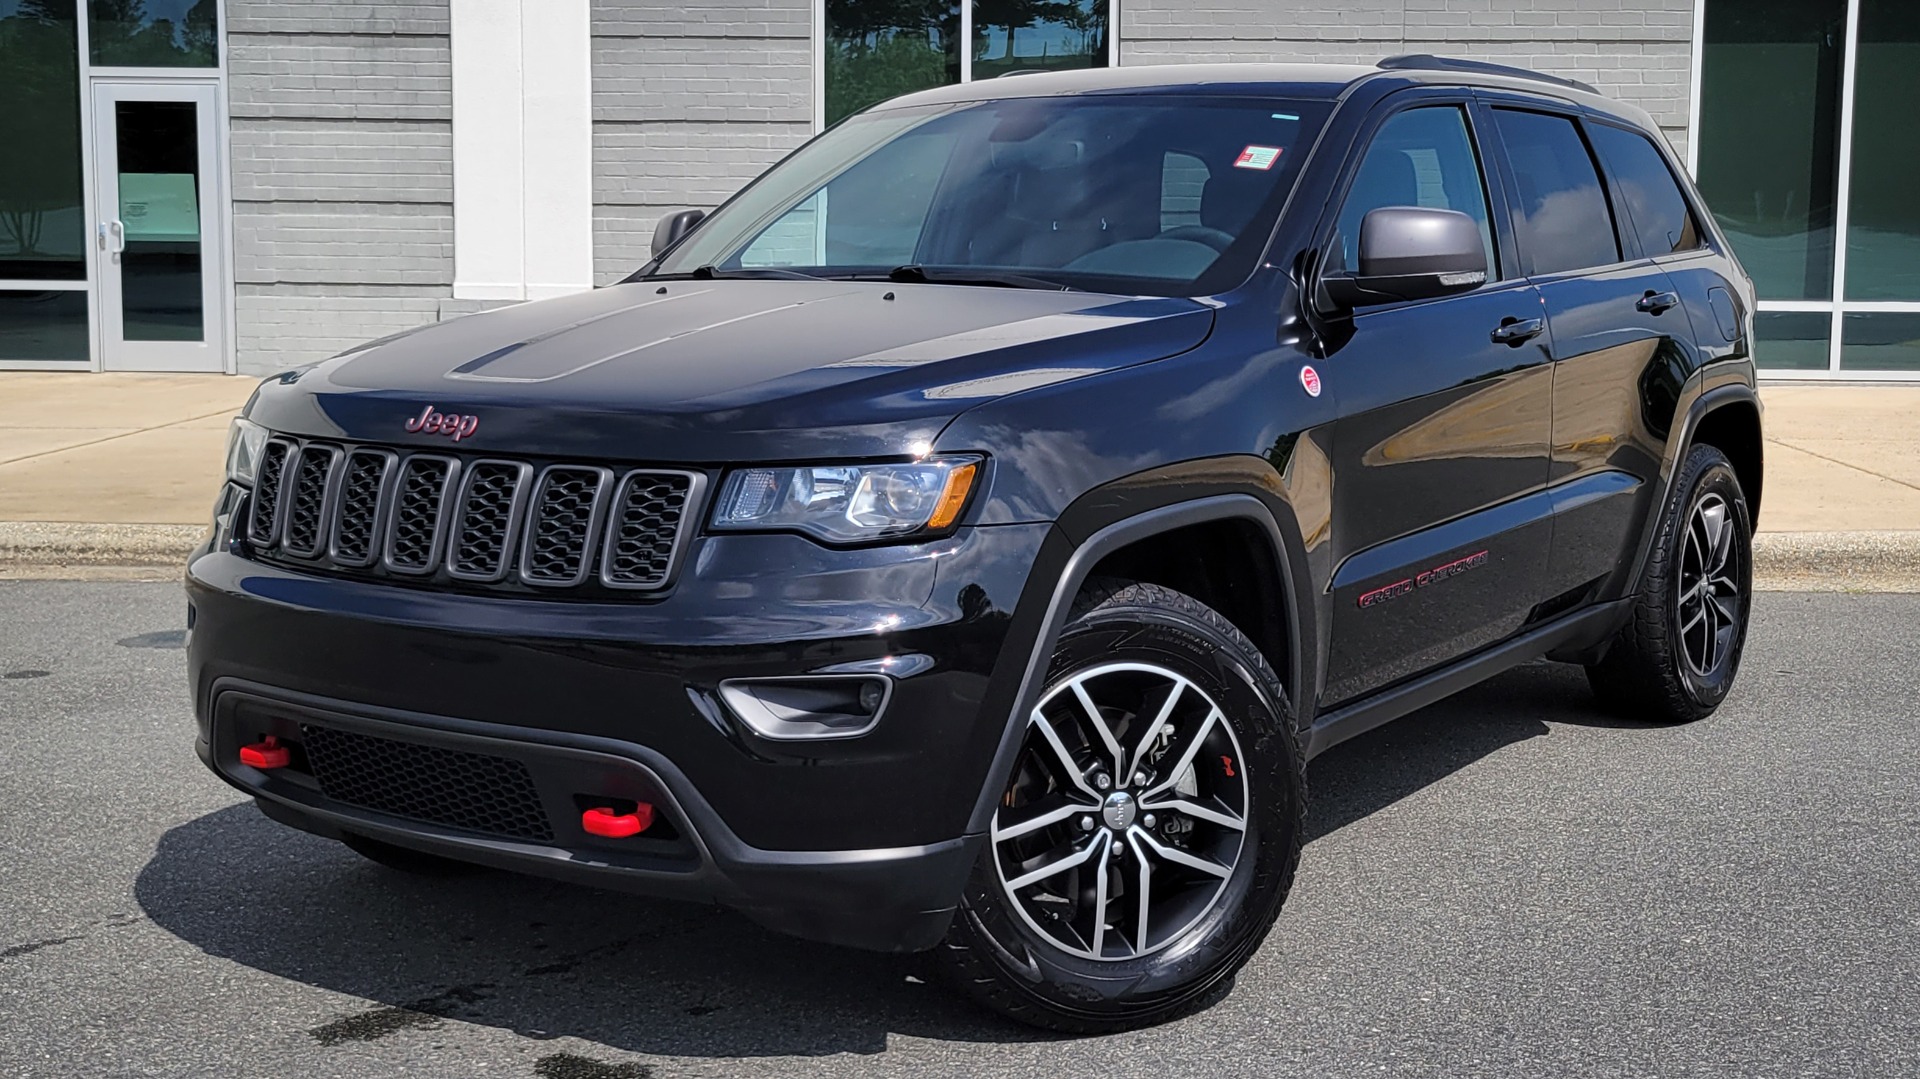 Used 2018 Jeep GRAND CHEROKEE TRAILHAWK 4X4 / 3.6L / NAV / BLIND SPOT / REARVIEW for sale $38,000 at Formula Imports in Charlotte NC 28227 7